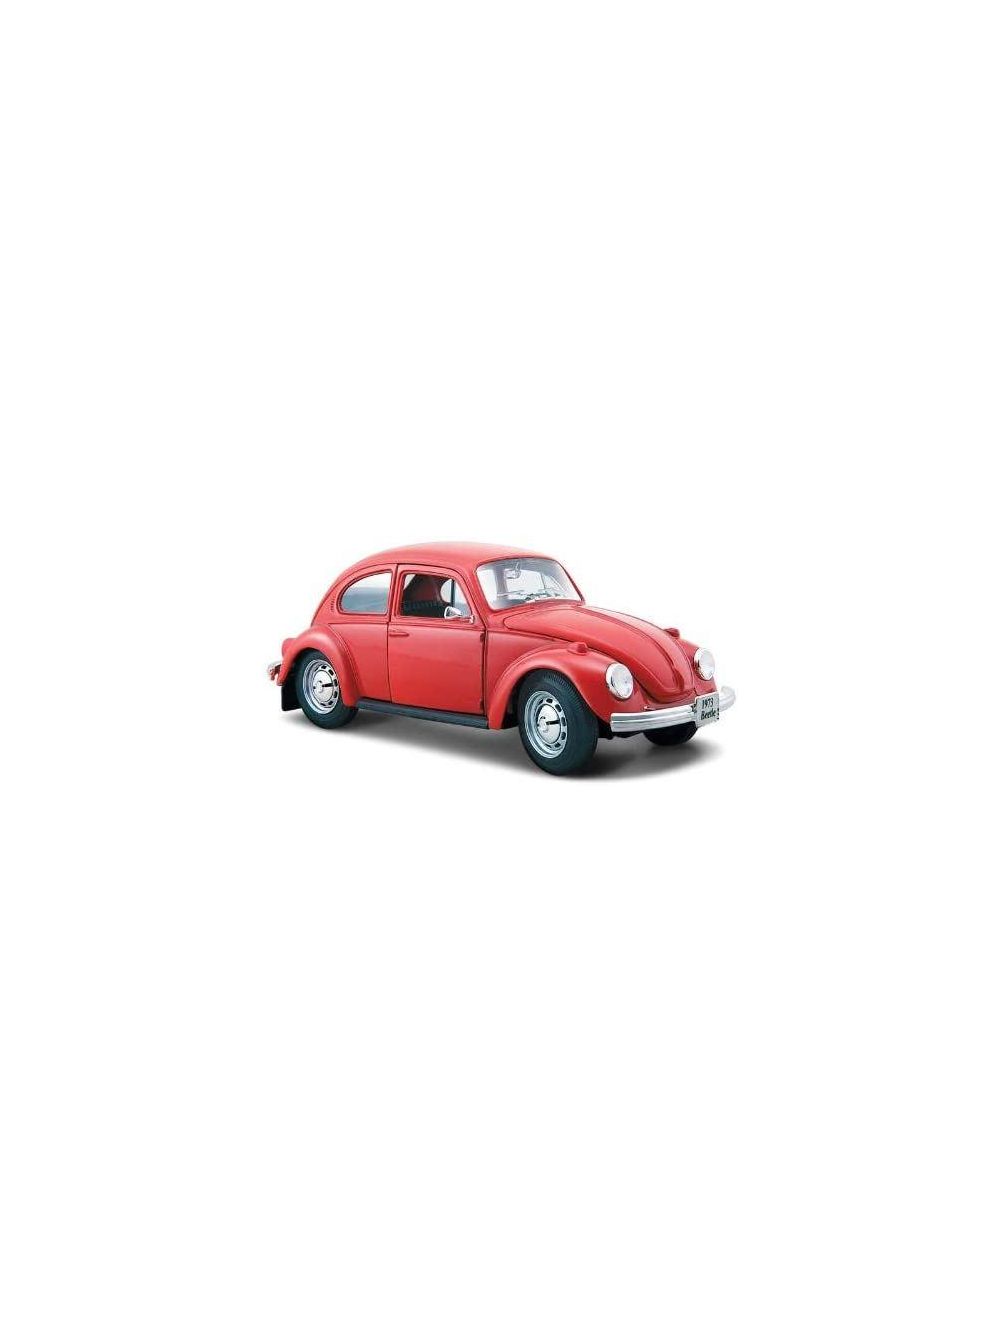 VW Classic Beetle 1303 Car Maisto 1:24 Scale Diecast Detailed Model 1973 31926 